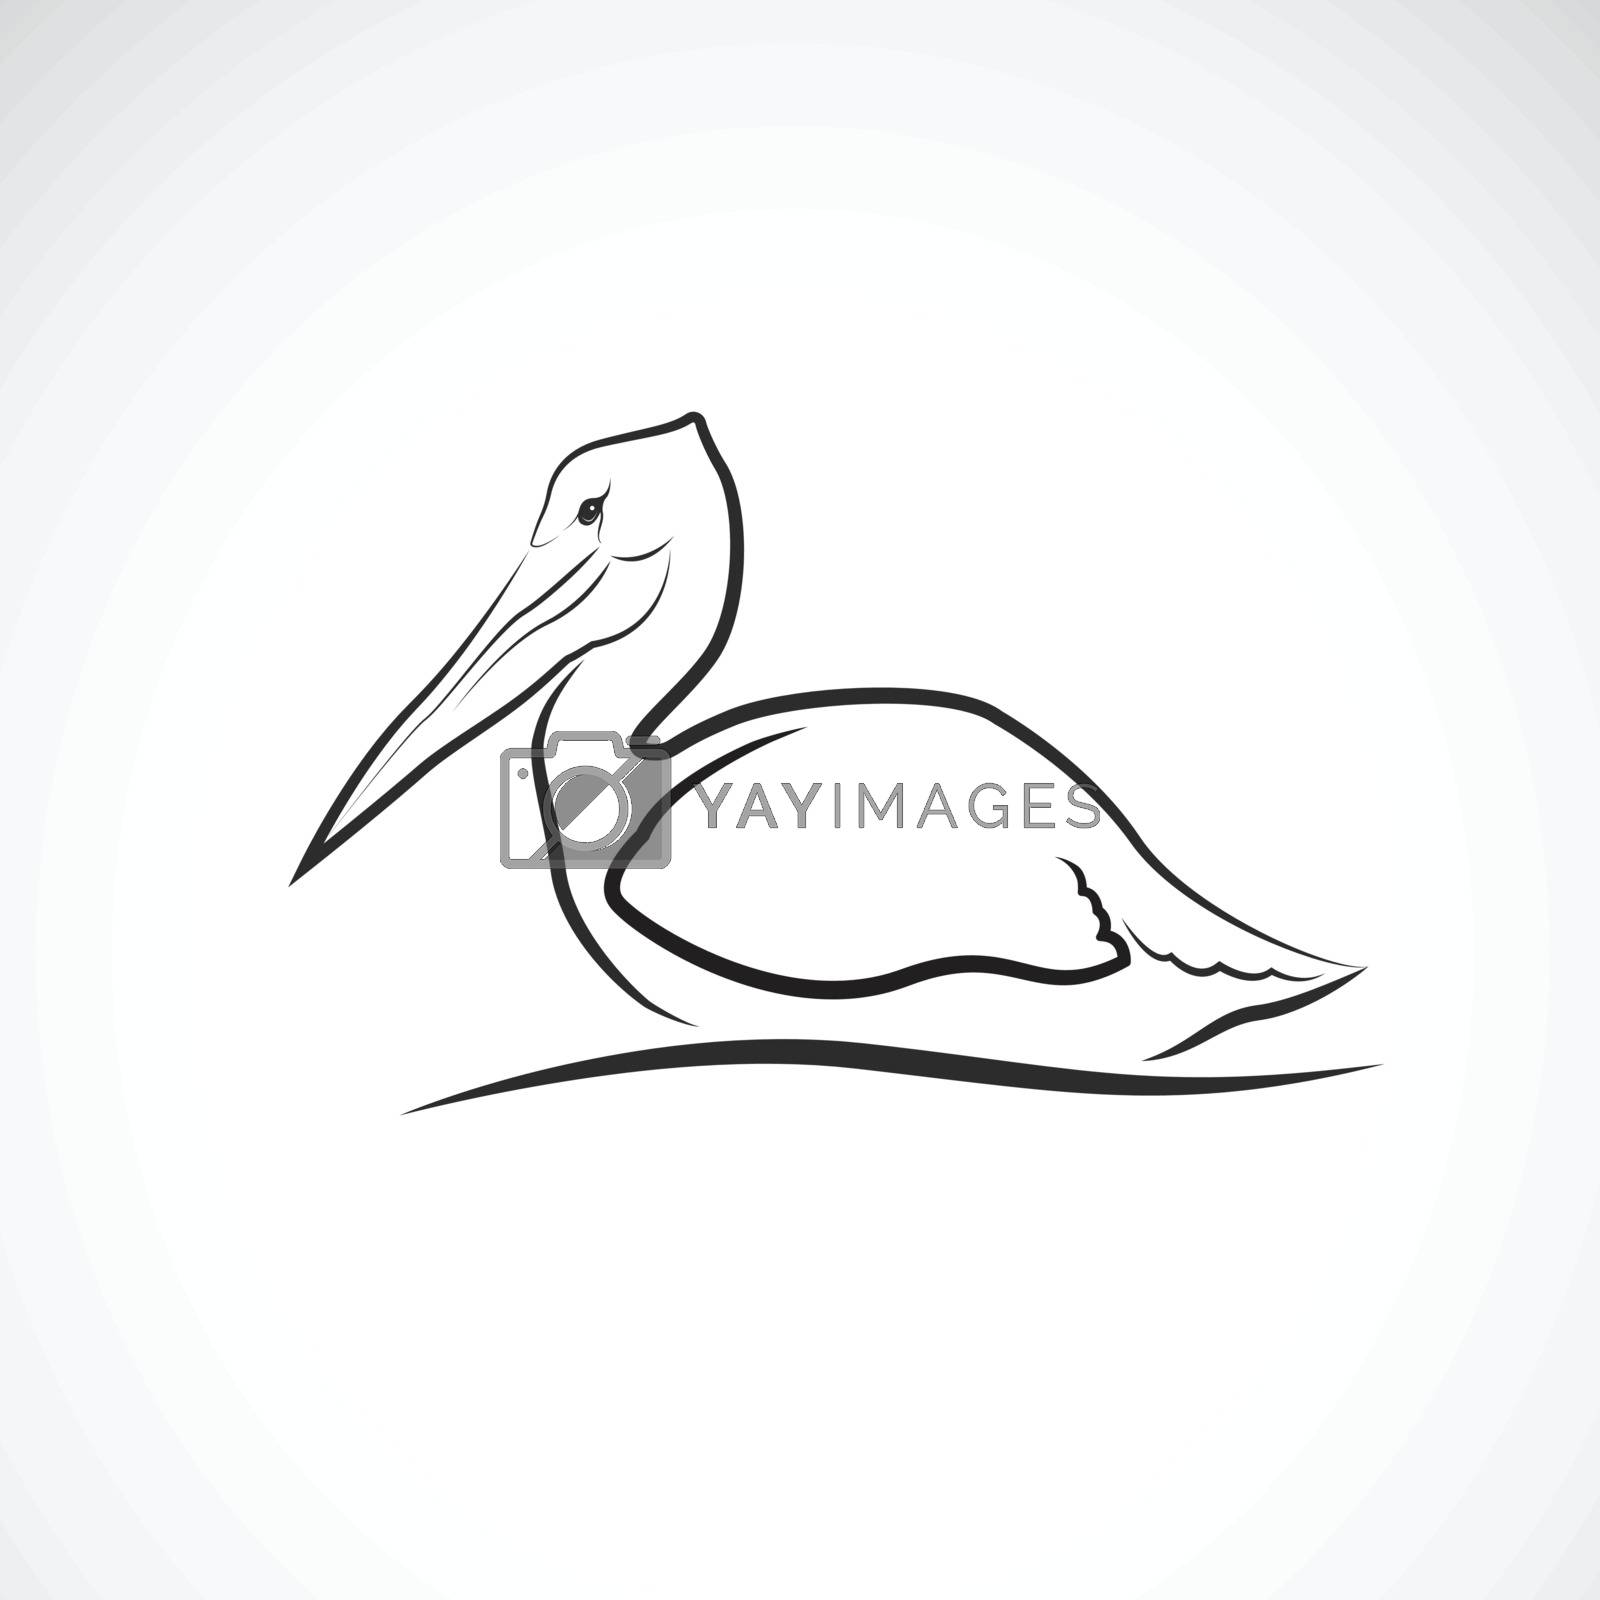 Royalty free image of Vector of Spot-billed pelican bird (Pelecanus philippensis) on w by yod67